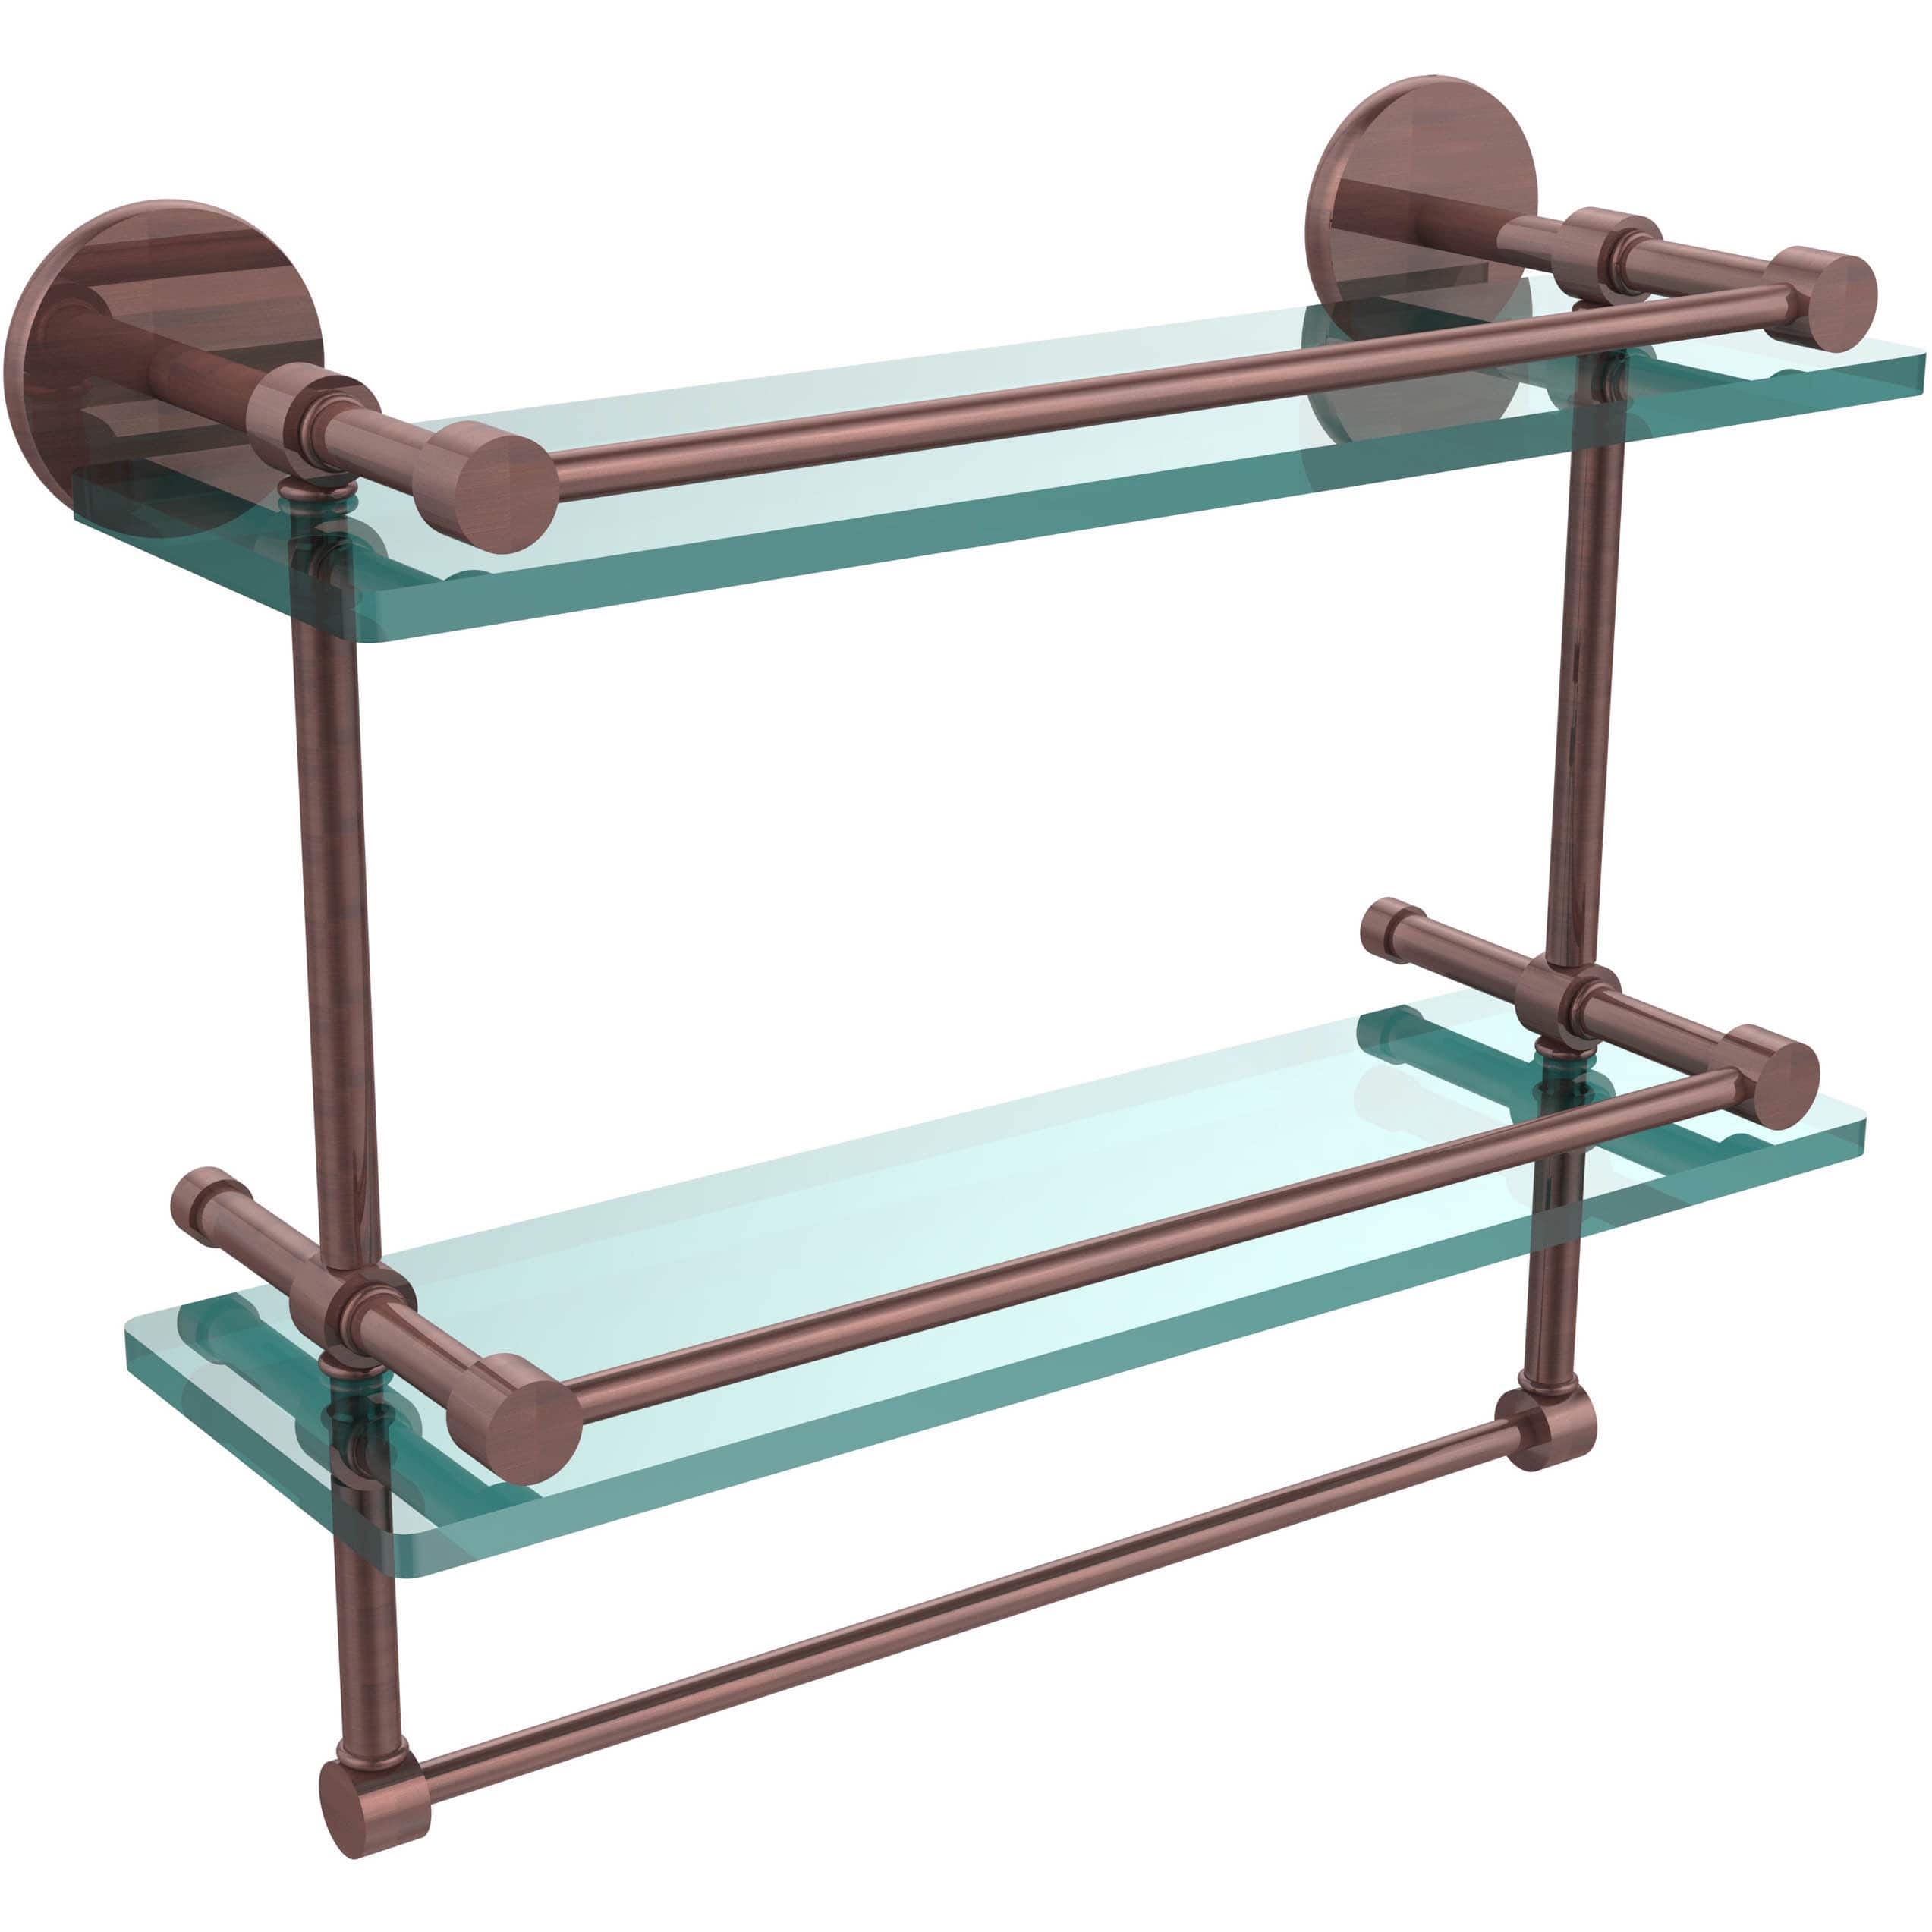 16 Inch Gallery Double Glass Shelf with Towel Bar - P1000-2TB/16-GAL-PC - image 2 of 5